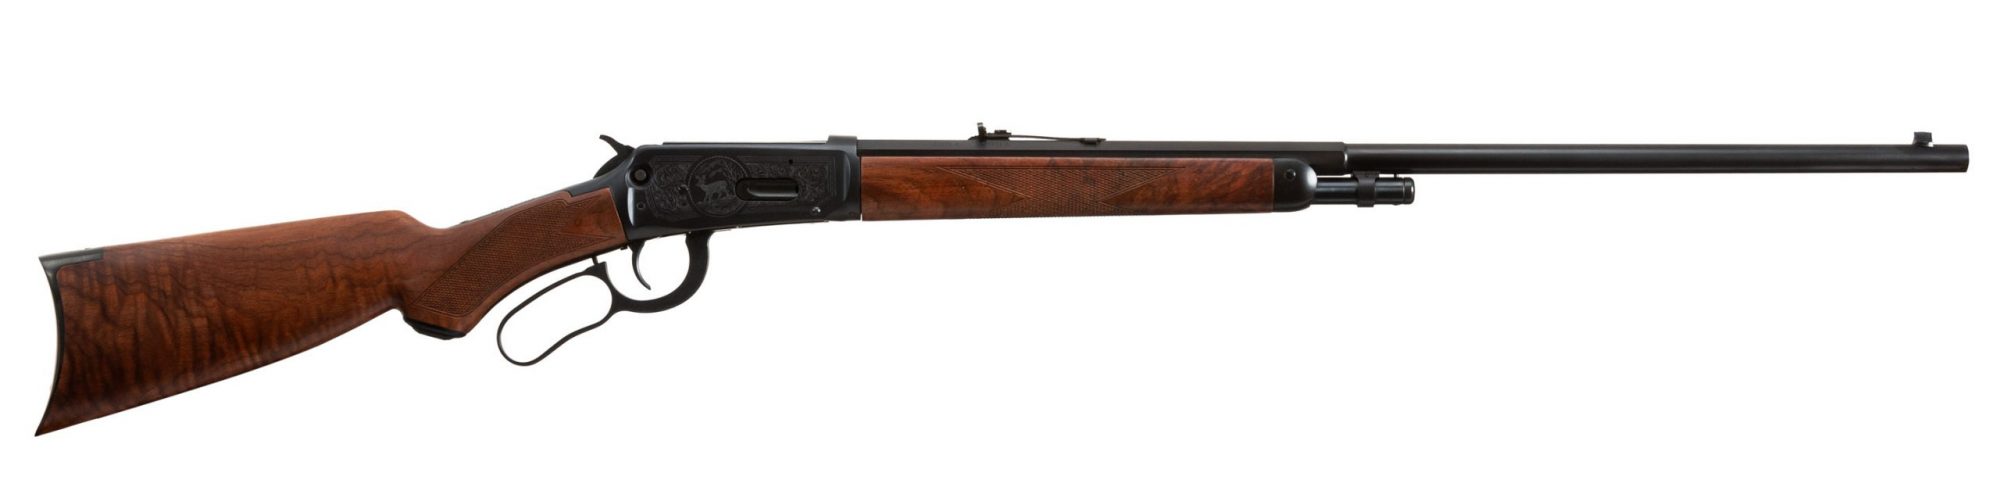 Photo of a pre-owned Winchester Model 94 Limited Edition Grade I Centennial Rifle, for sale by Turnbull Restoration of Bloomfield, NY